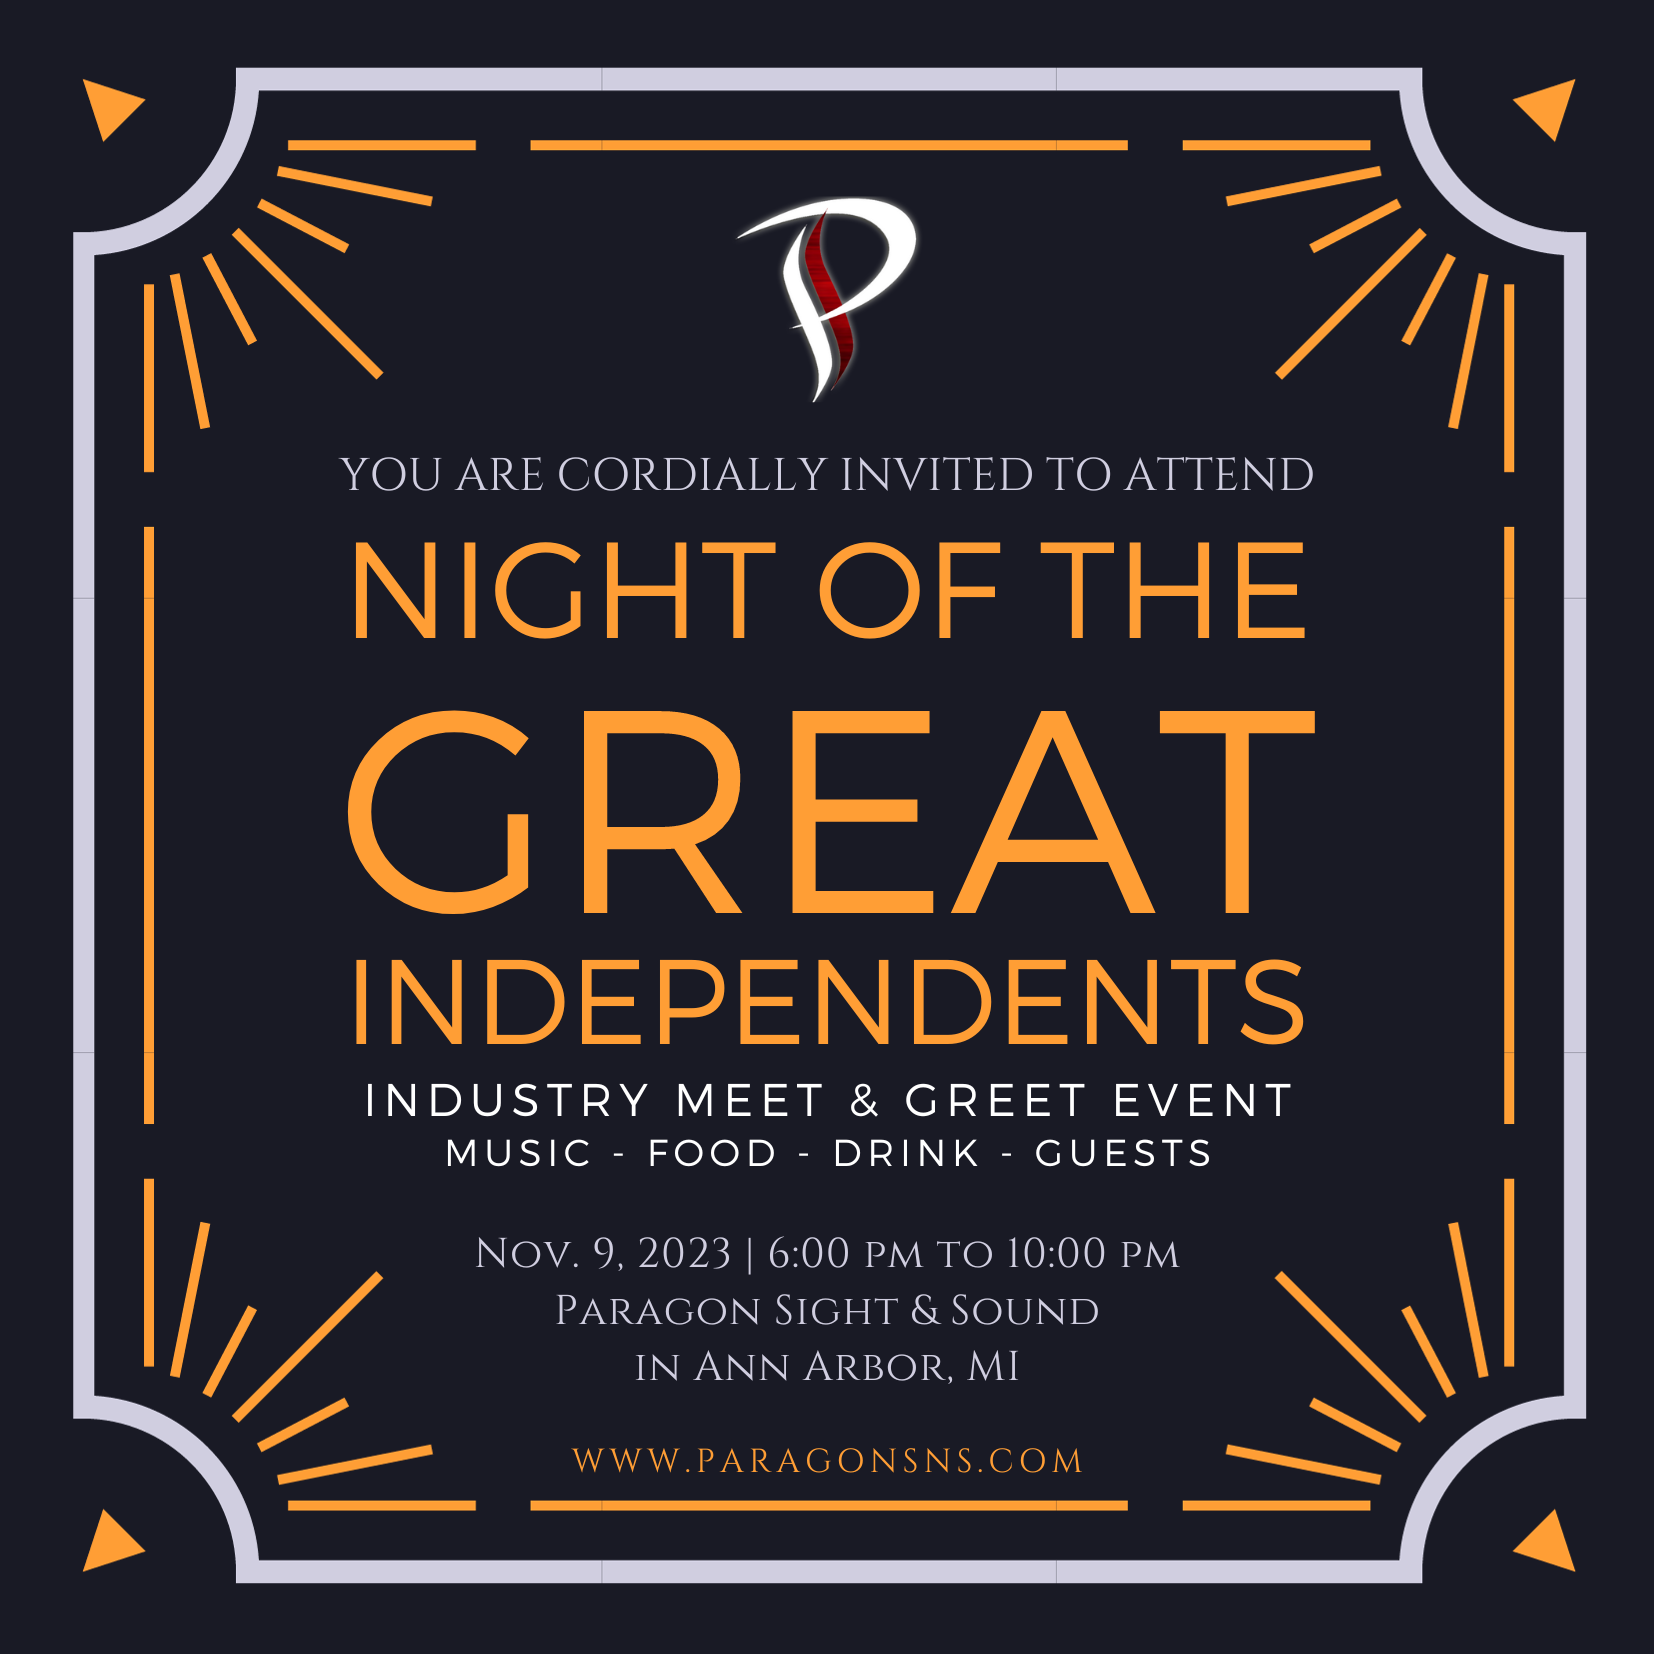 Store Event: Night of the Great Independents | 11/9/23 at Paragon SNS